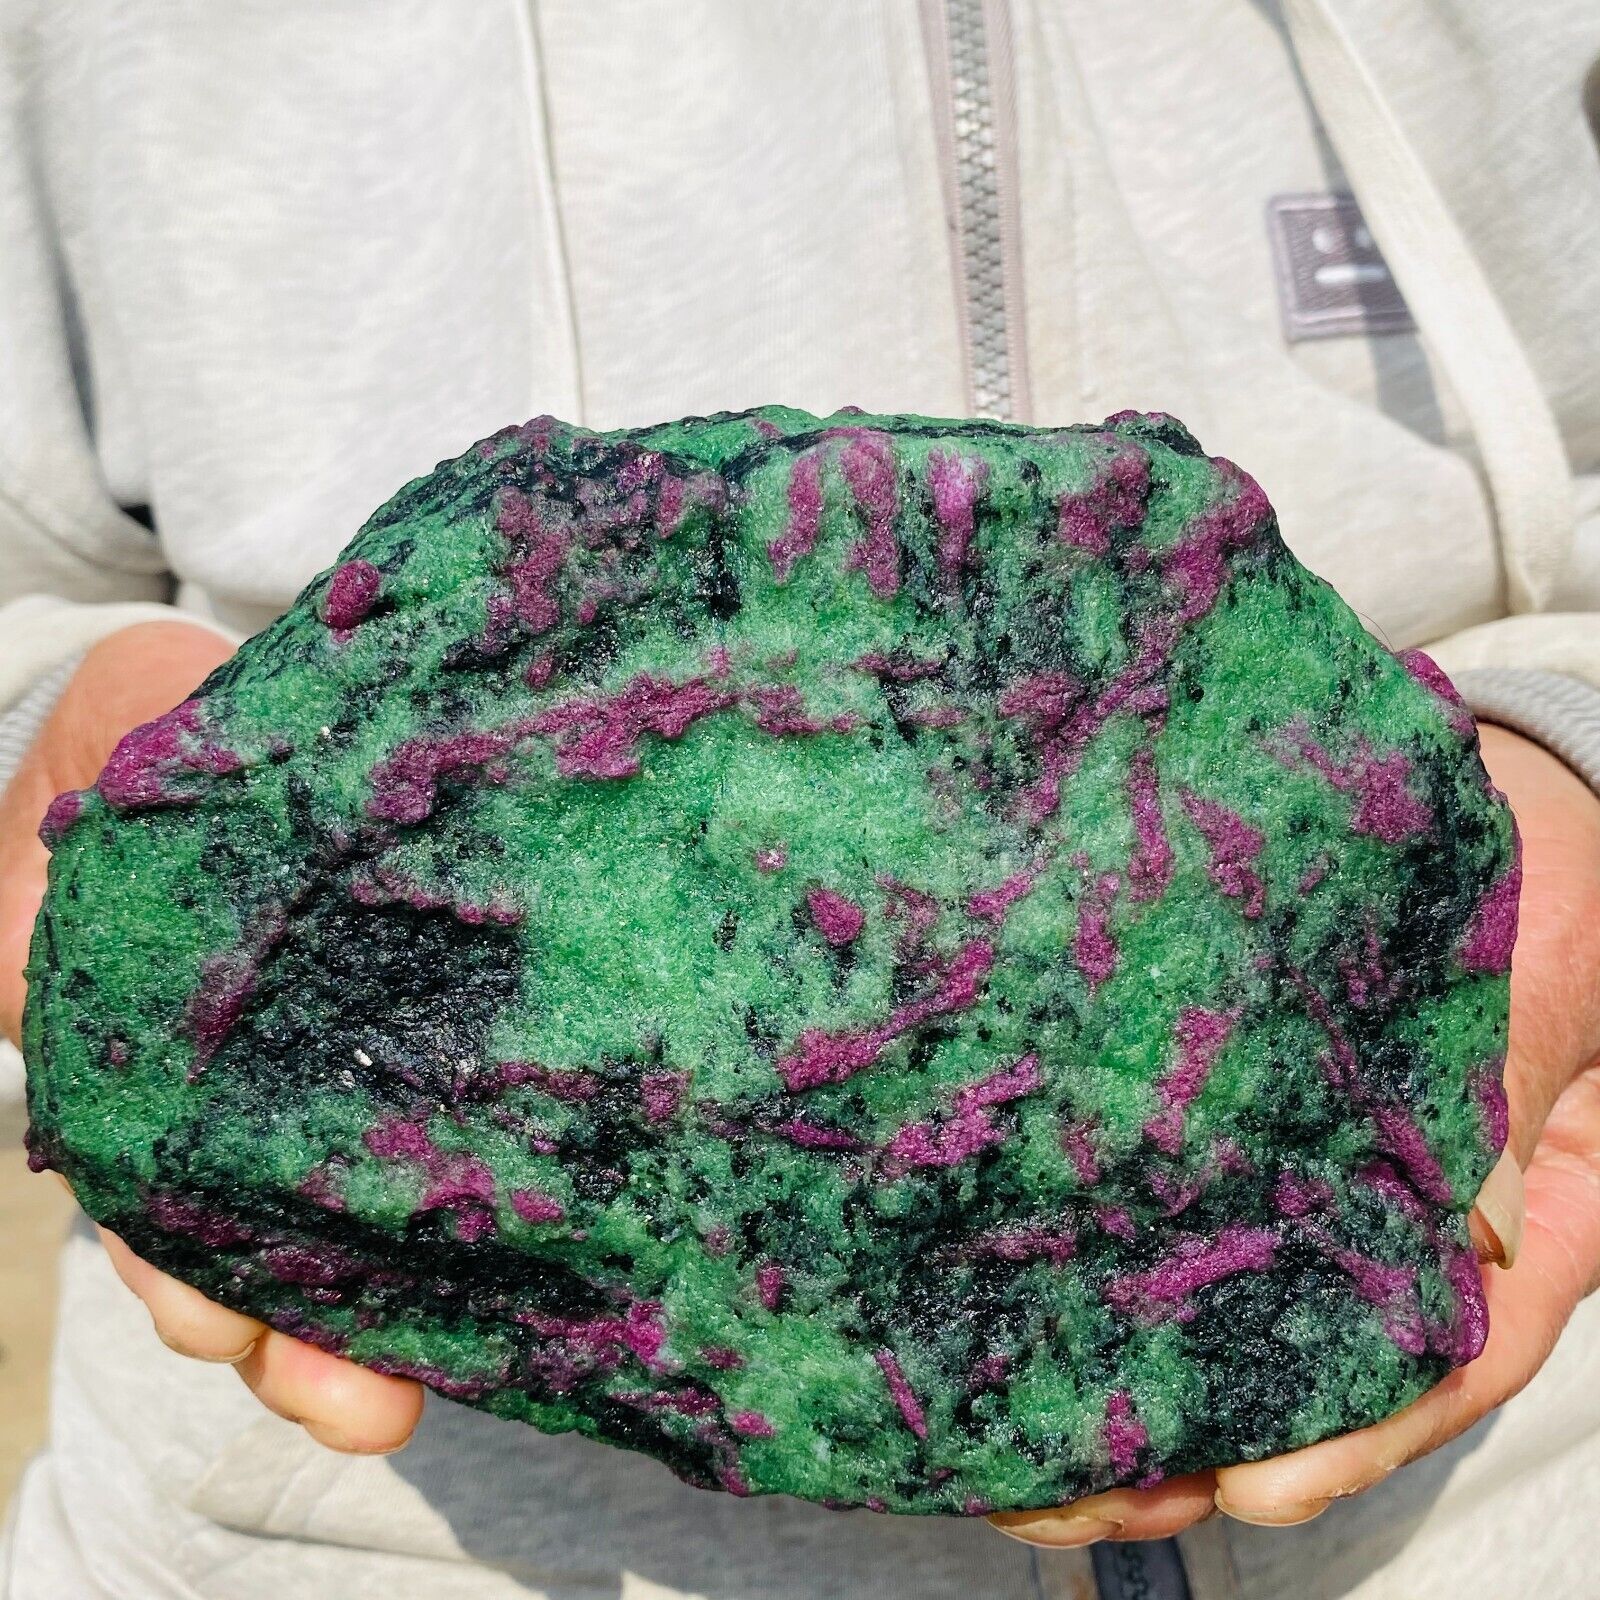 2.8lb Amazing Large Ruby Zoisite Gemstone Natural Mineral Rough Display Specimen